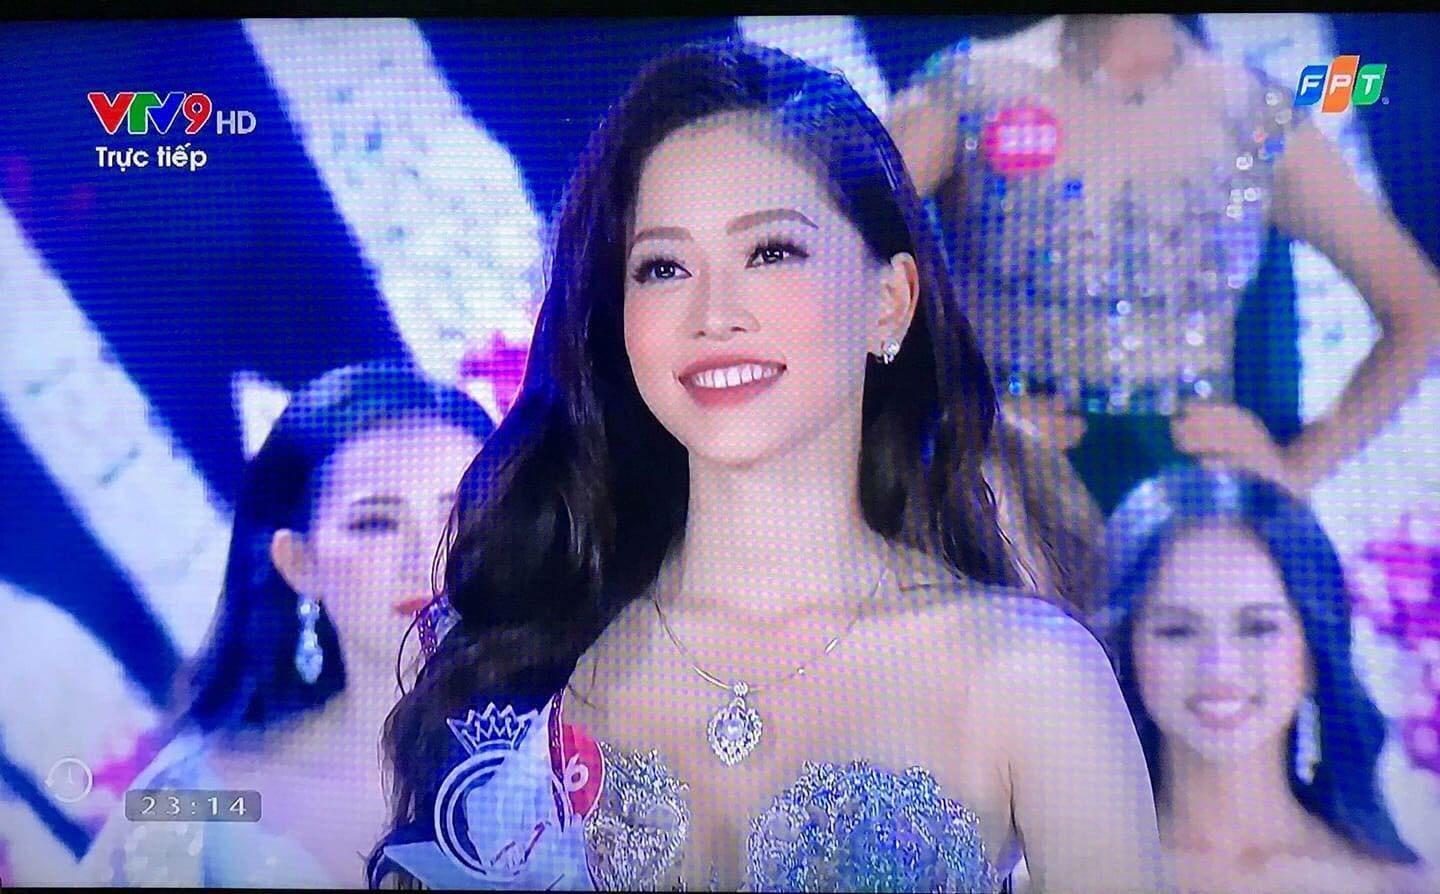 A screen capture of Miss Vietnam 2018 first runner-up Bui Phuong Nga at the pageant's finale in Ho Chi Minh City on September 16, 2018.